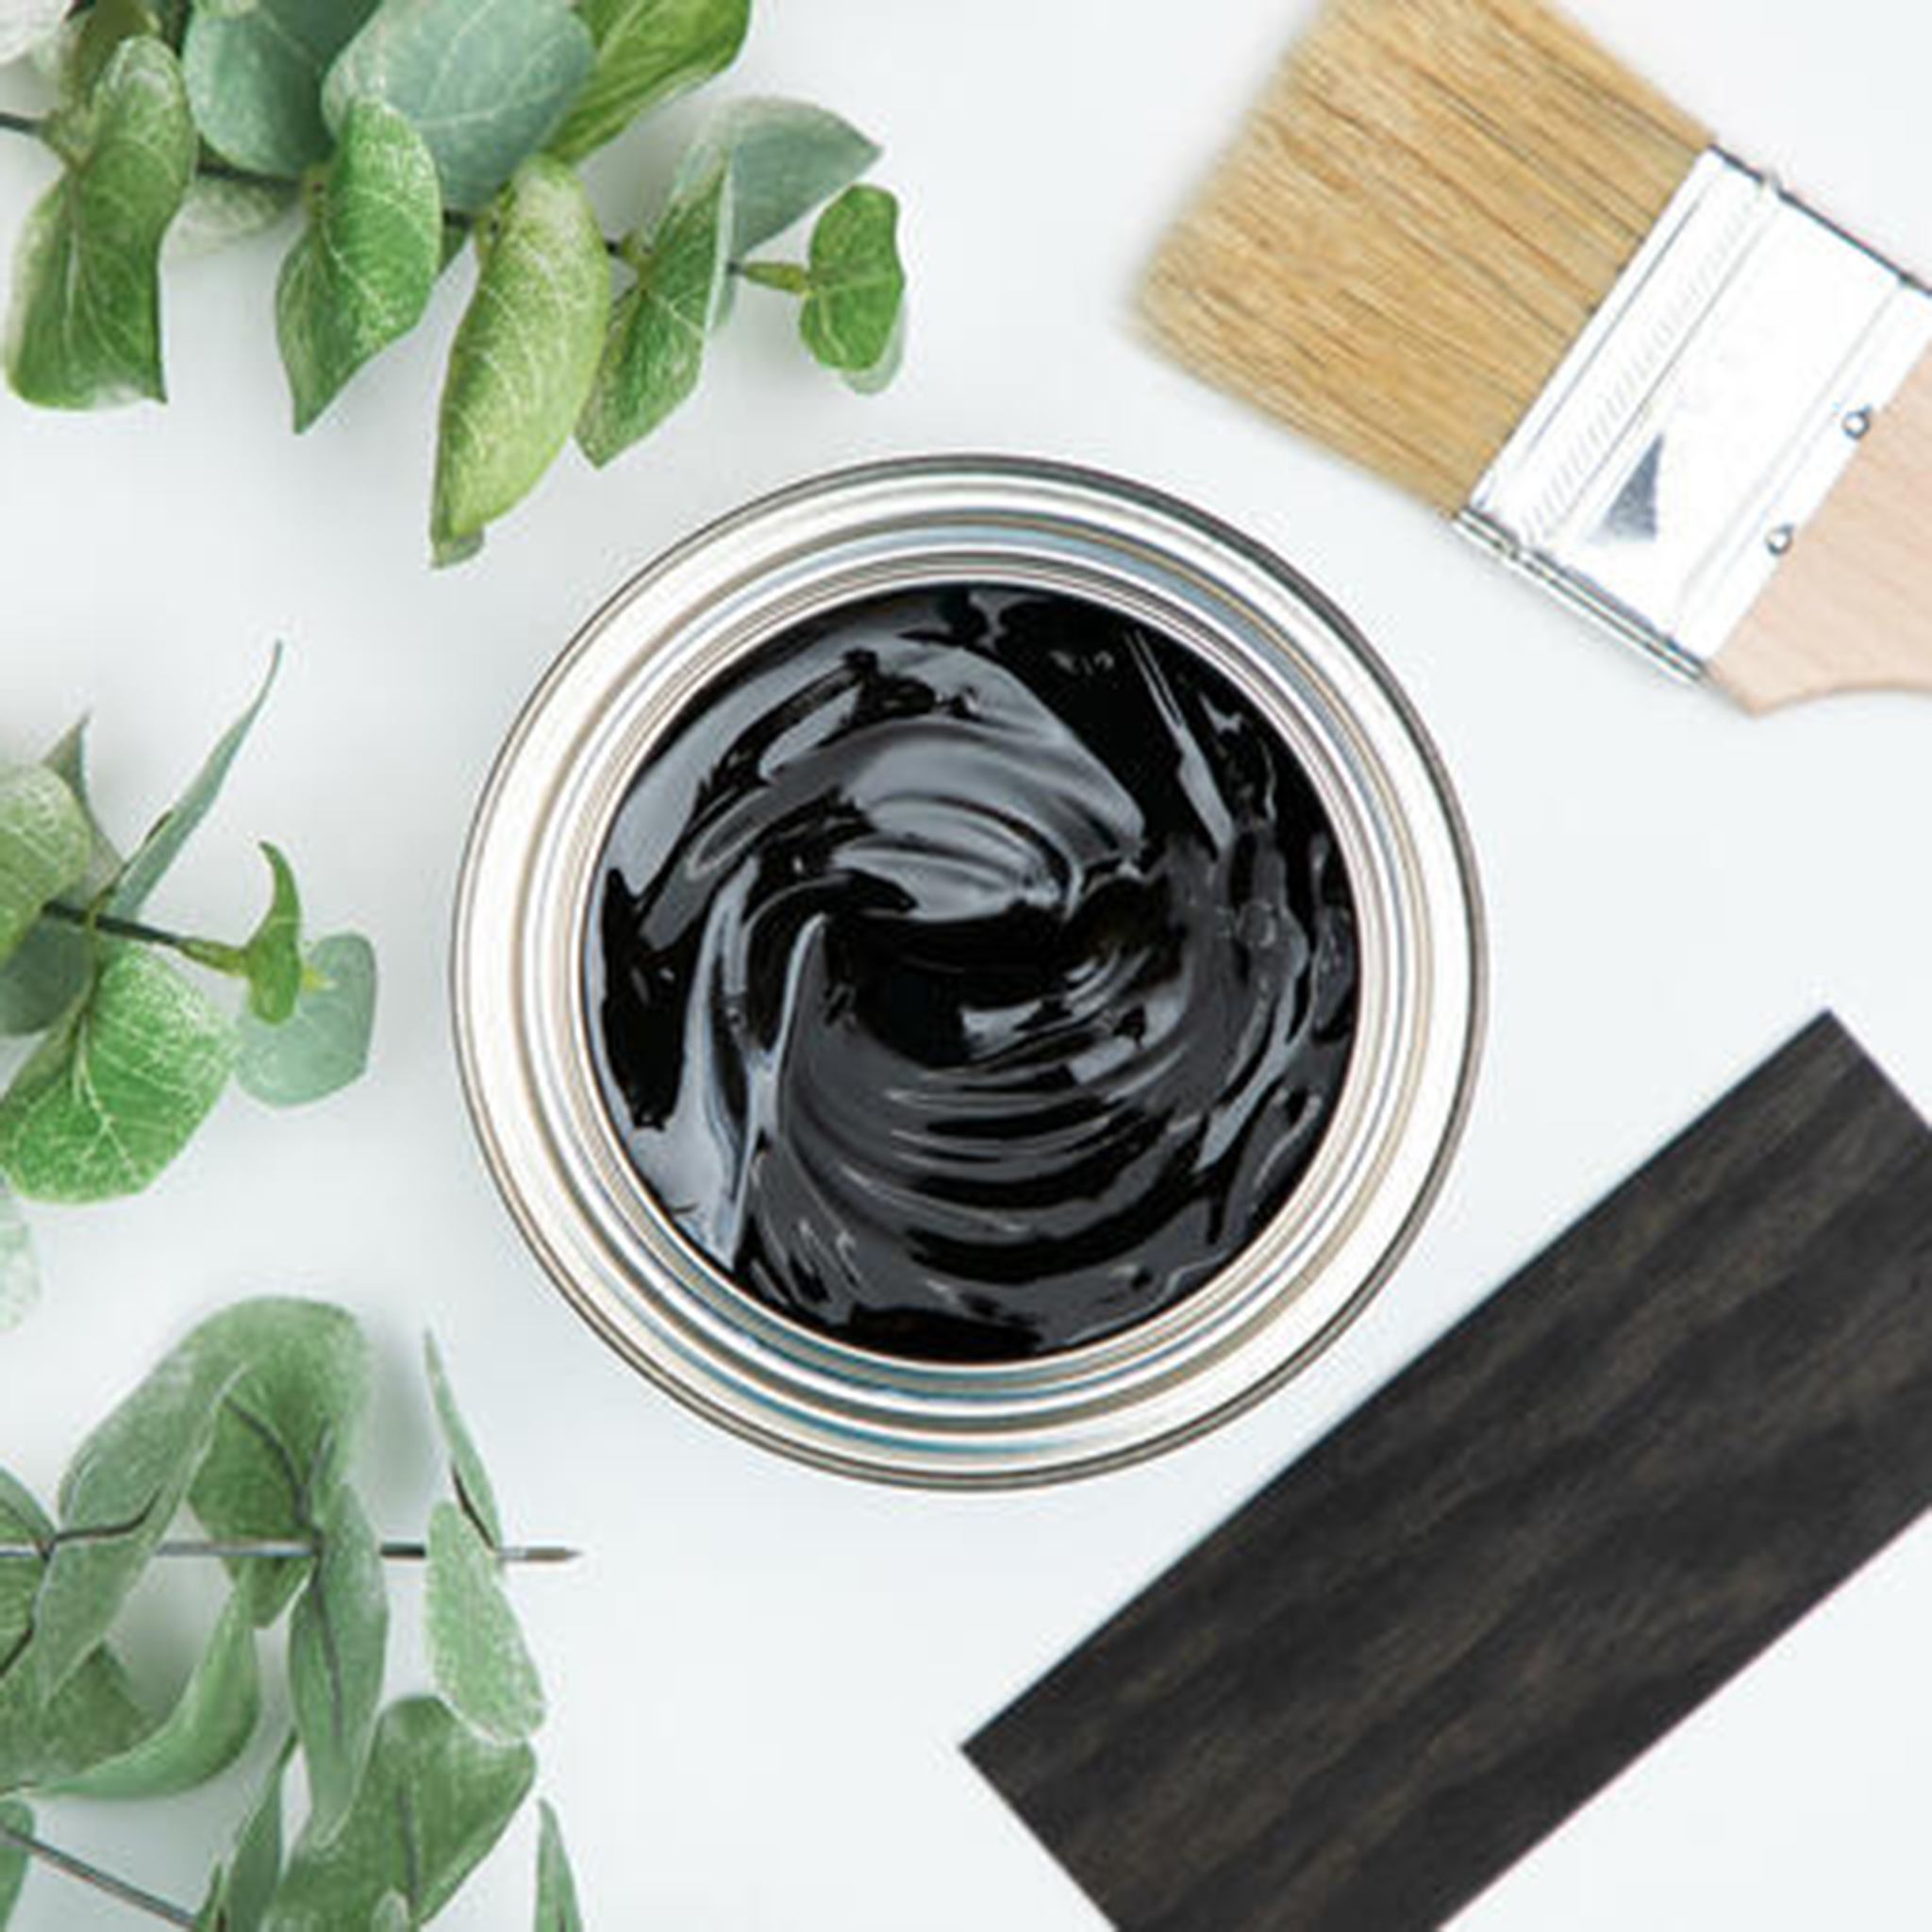 A arial view of an open can of Dixie Belle's No Pain Gel Stain in Colonial Black is against a white background. The can is surrounded by a paint brush, green foliage, and a wood swatch featuring the stain color.